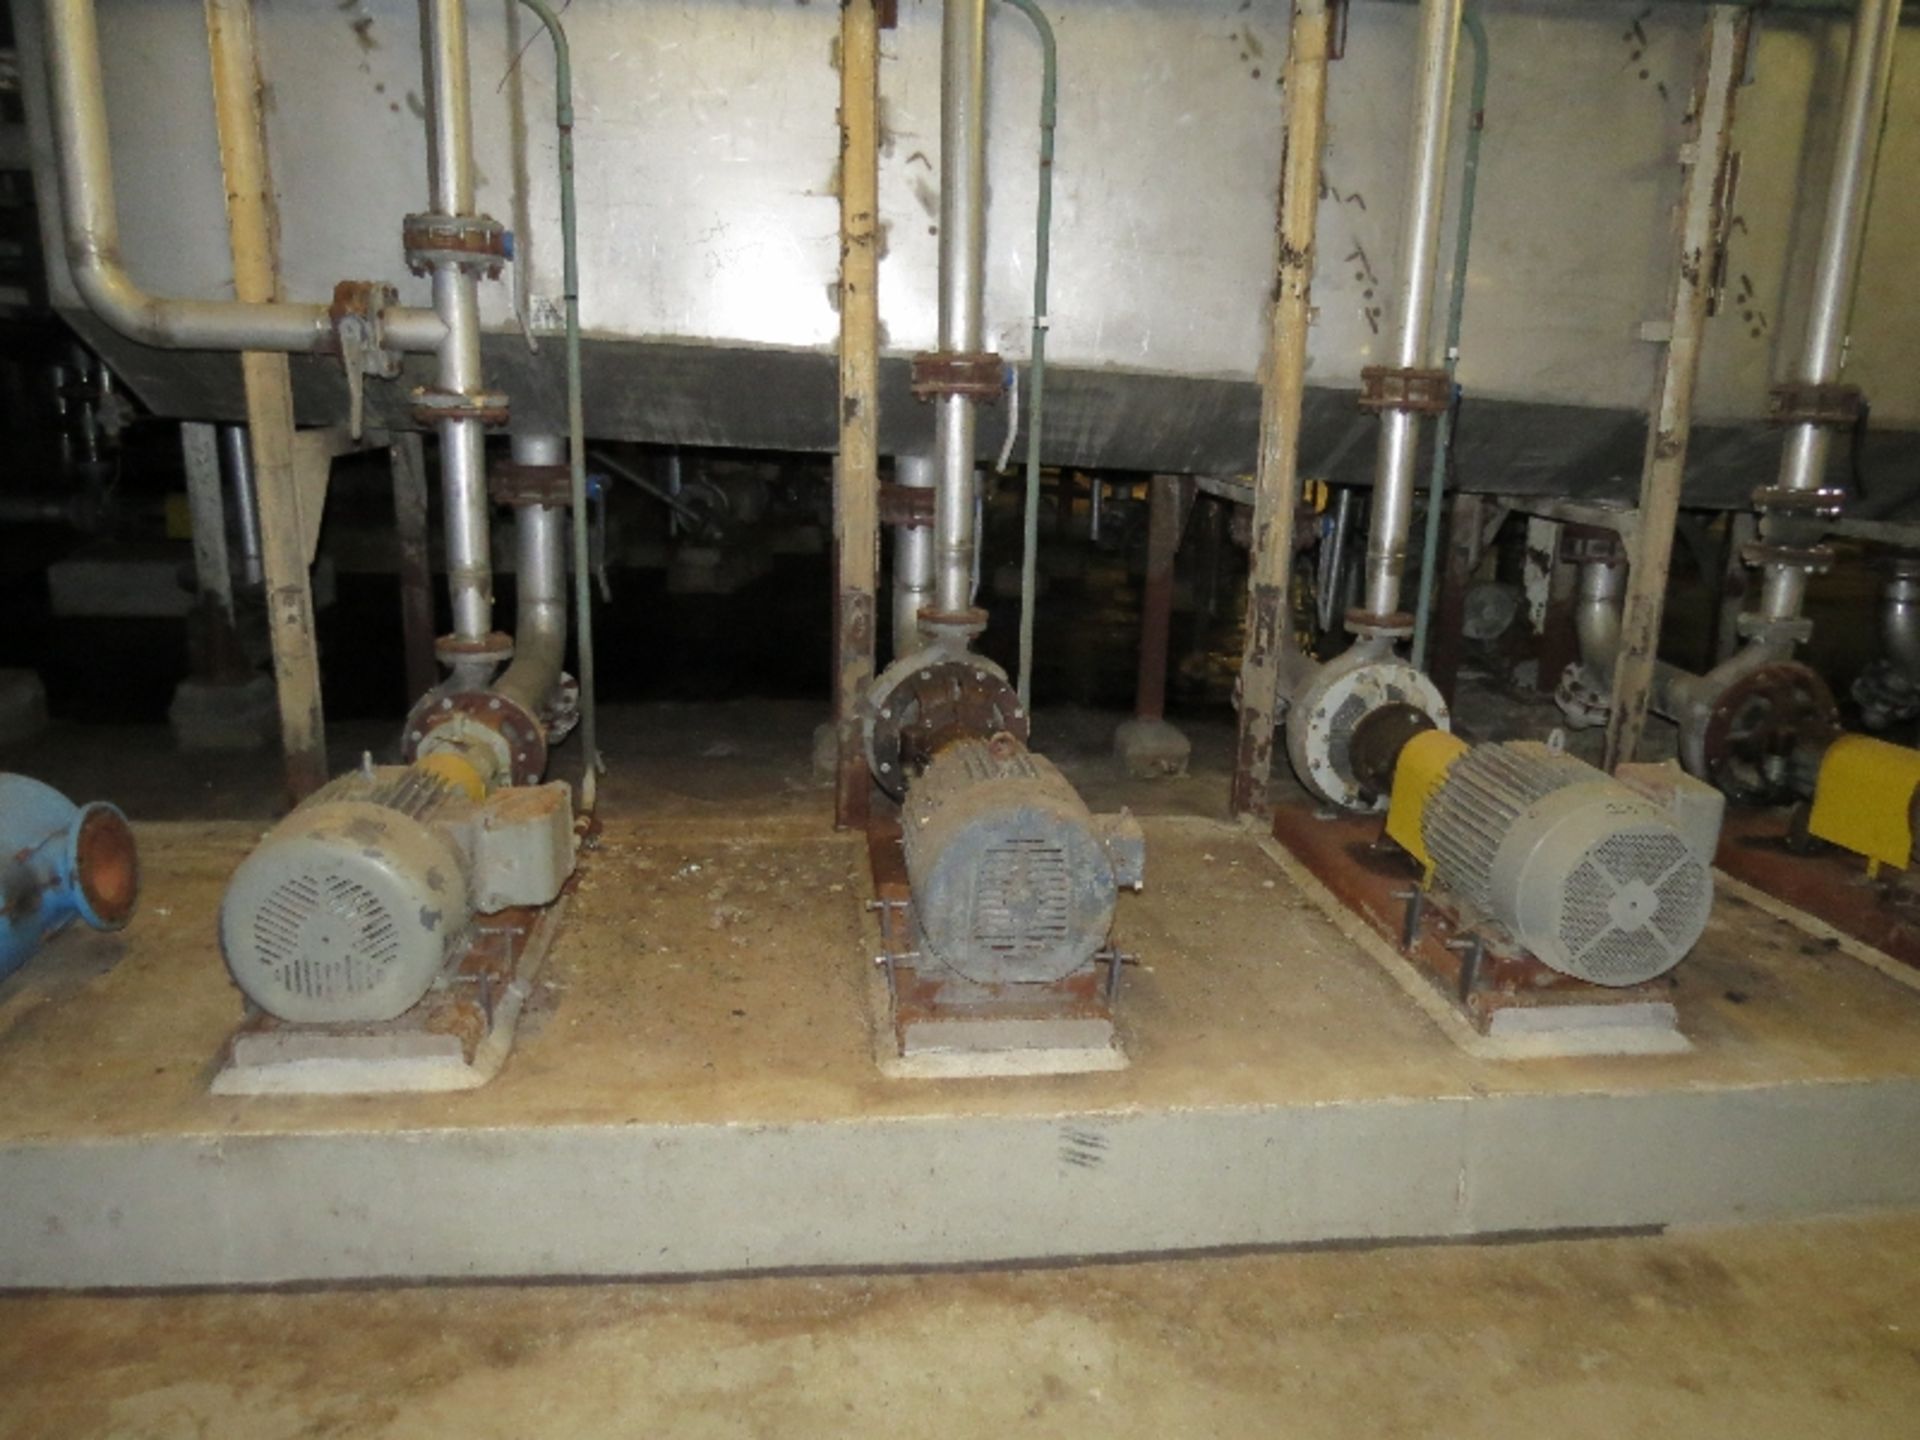 Fiber Washer system Stainless Steel Construction Trough with 7 Re-Circulation Pumps - Image 3 of 10